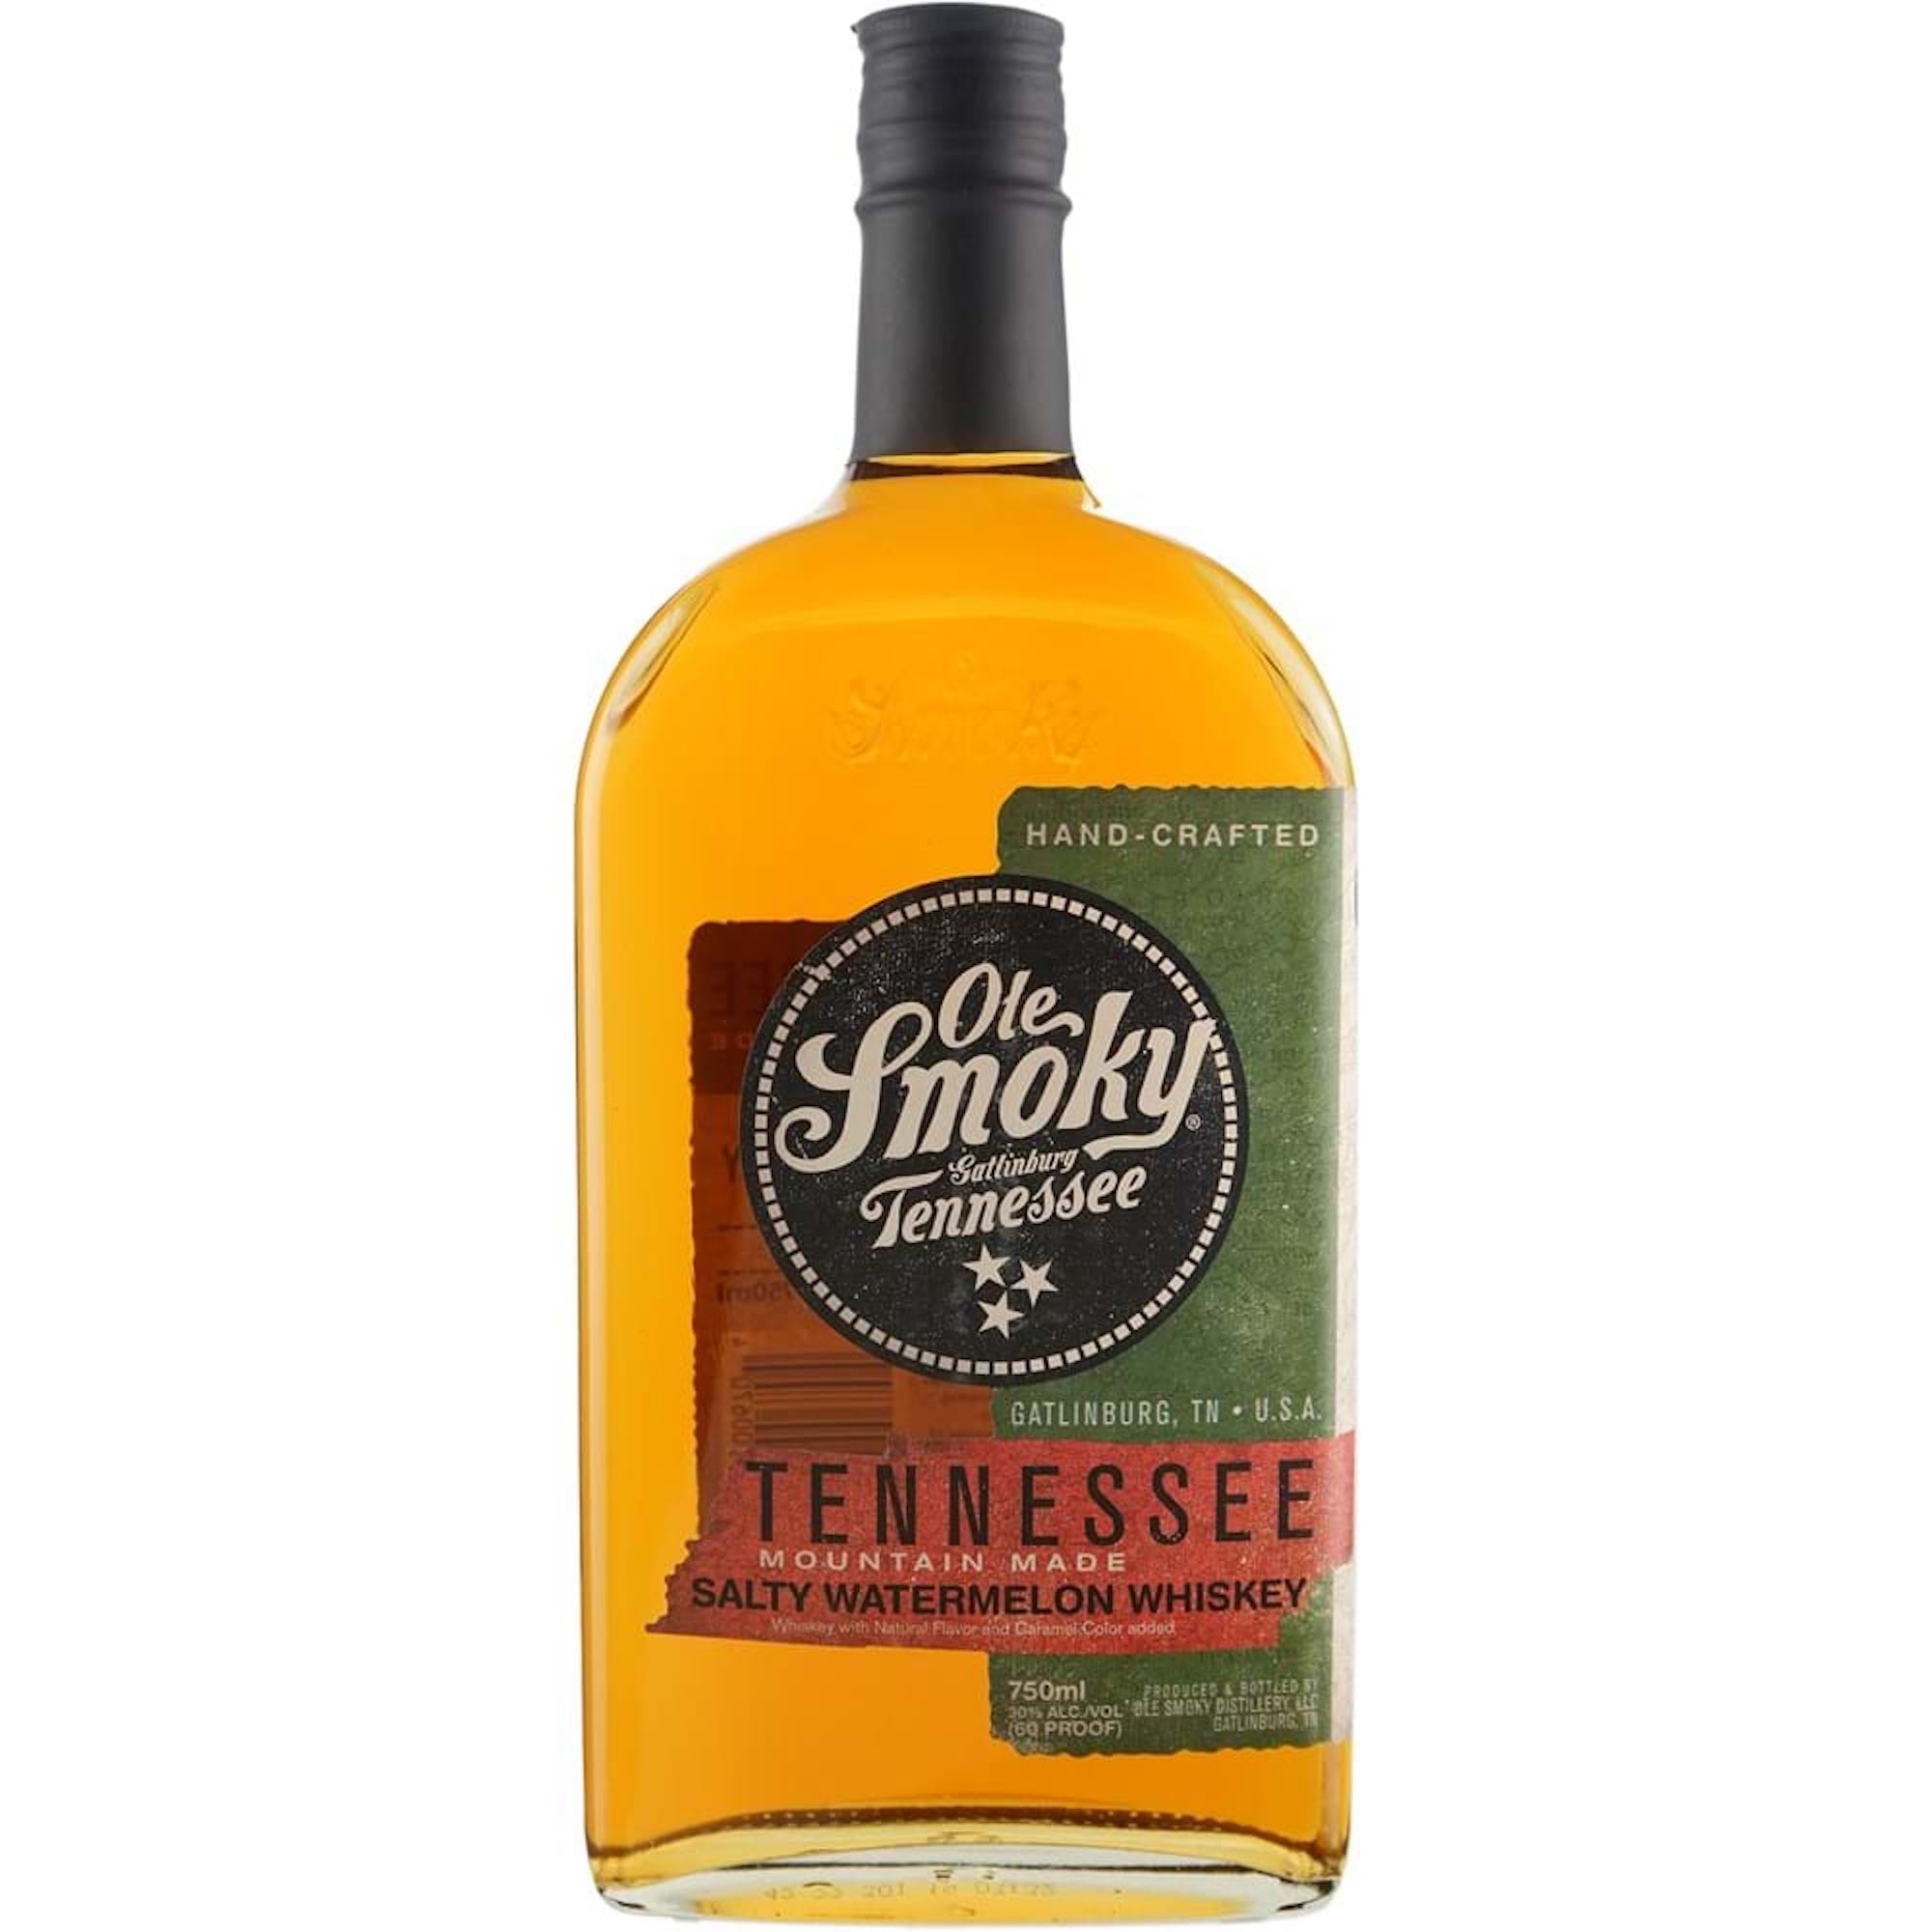 Ole Smoky Salted Watermelon Whiskey